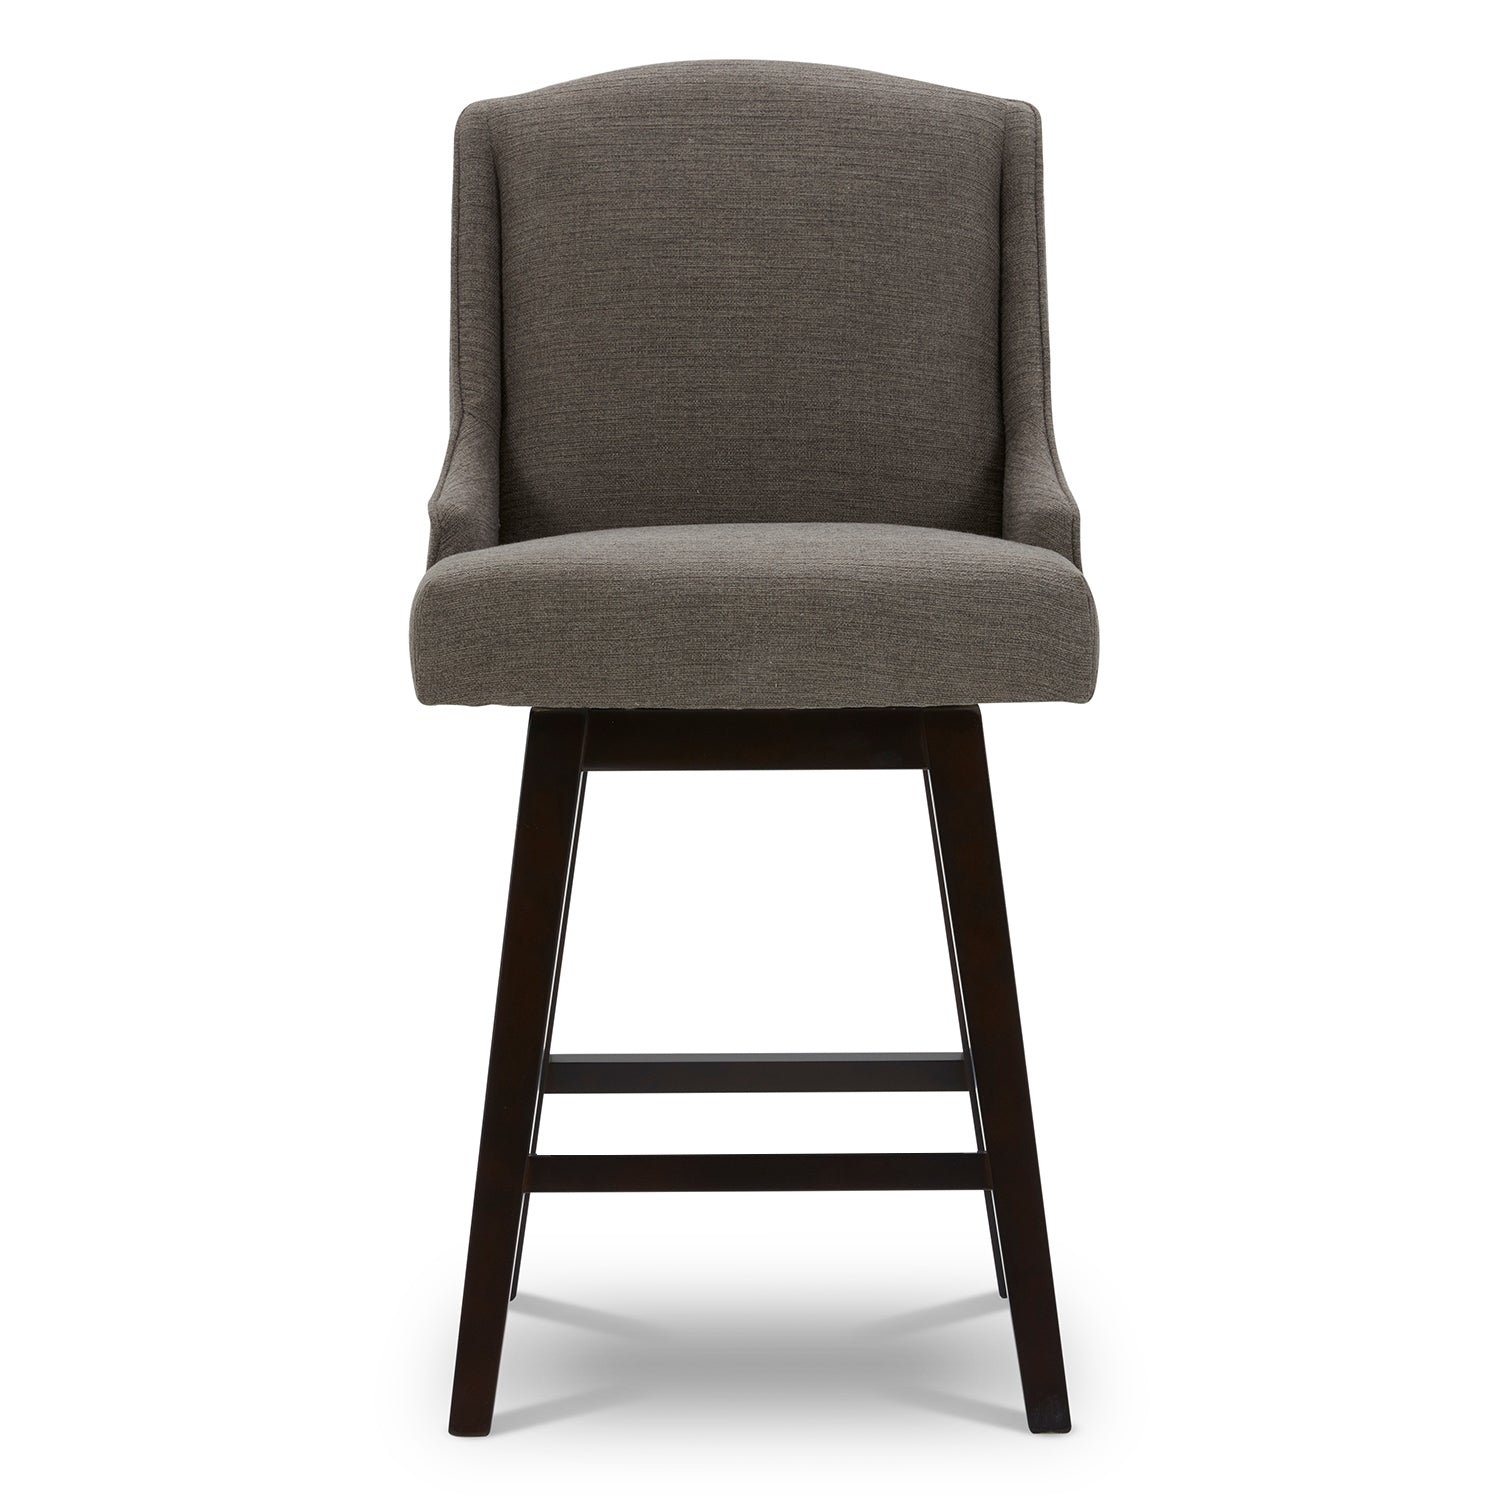 CHITA LIVING-Ryker Transitional Swivel Counter Stool - Fabric & Leather-Counter Stools-Performance Fabric-Charcoal-1 Pack